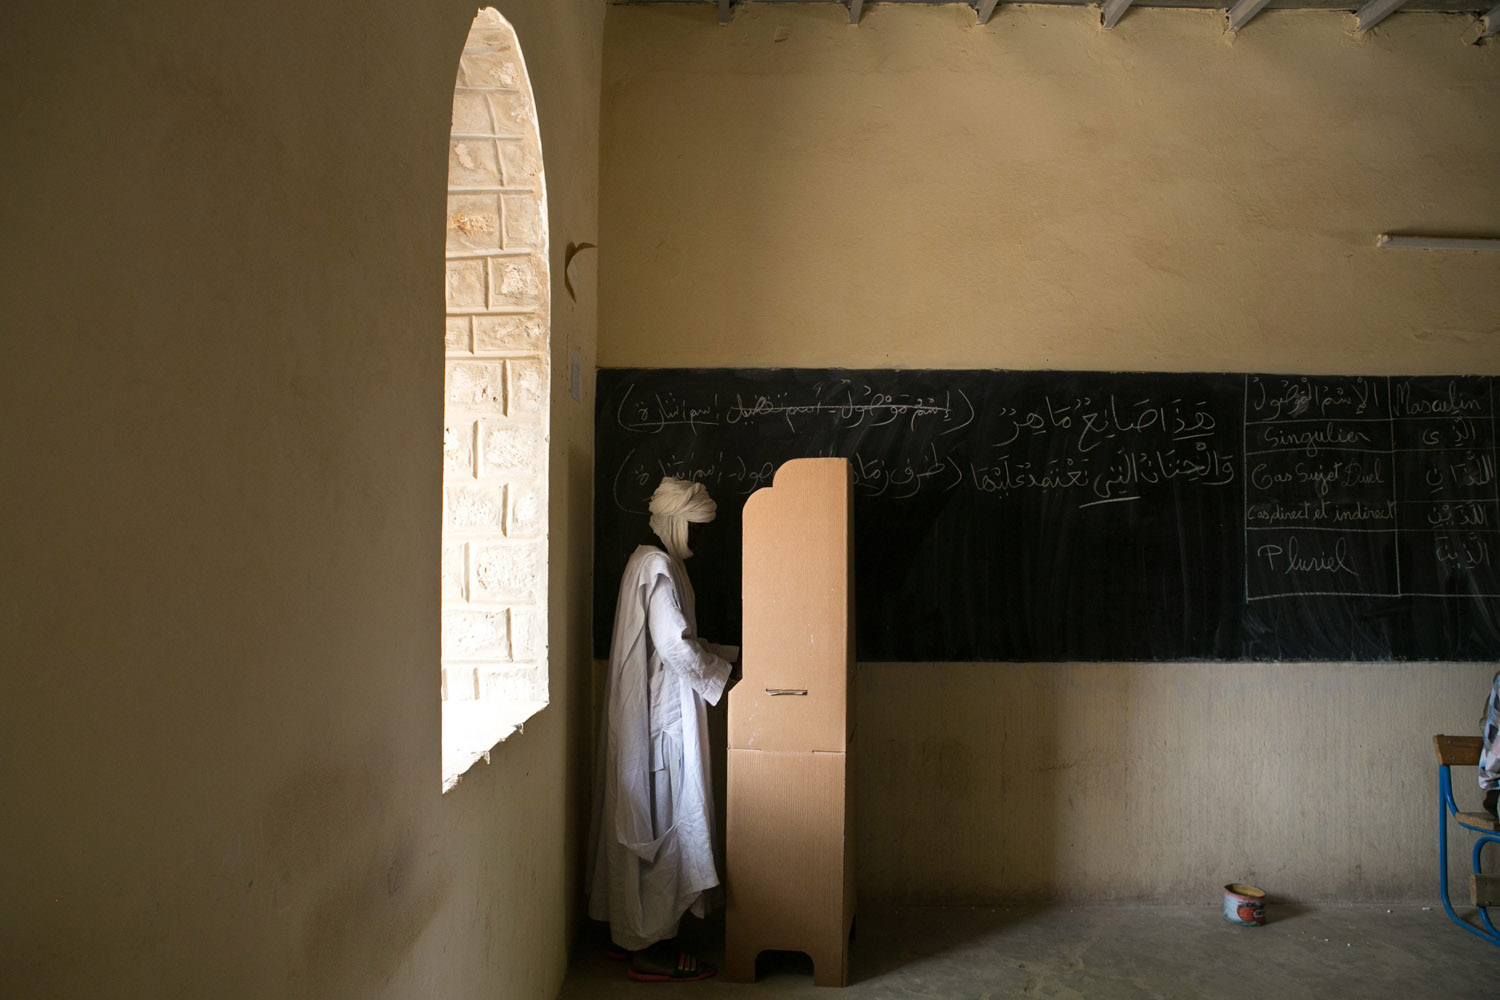 July 28, 2013. A Tuareg man casts his vote for Mali's next president in Timbuktu.